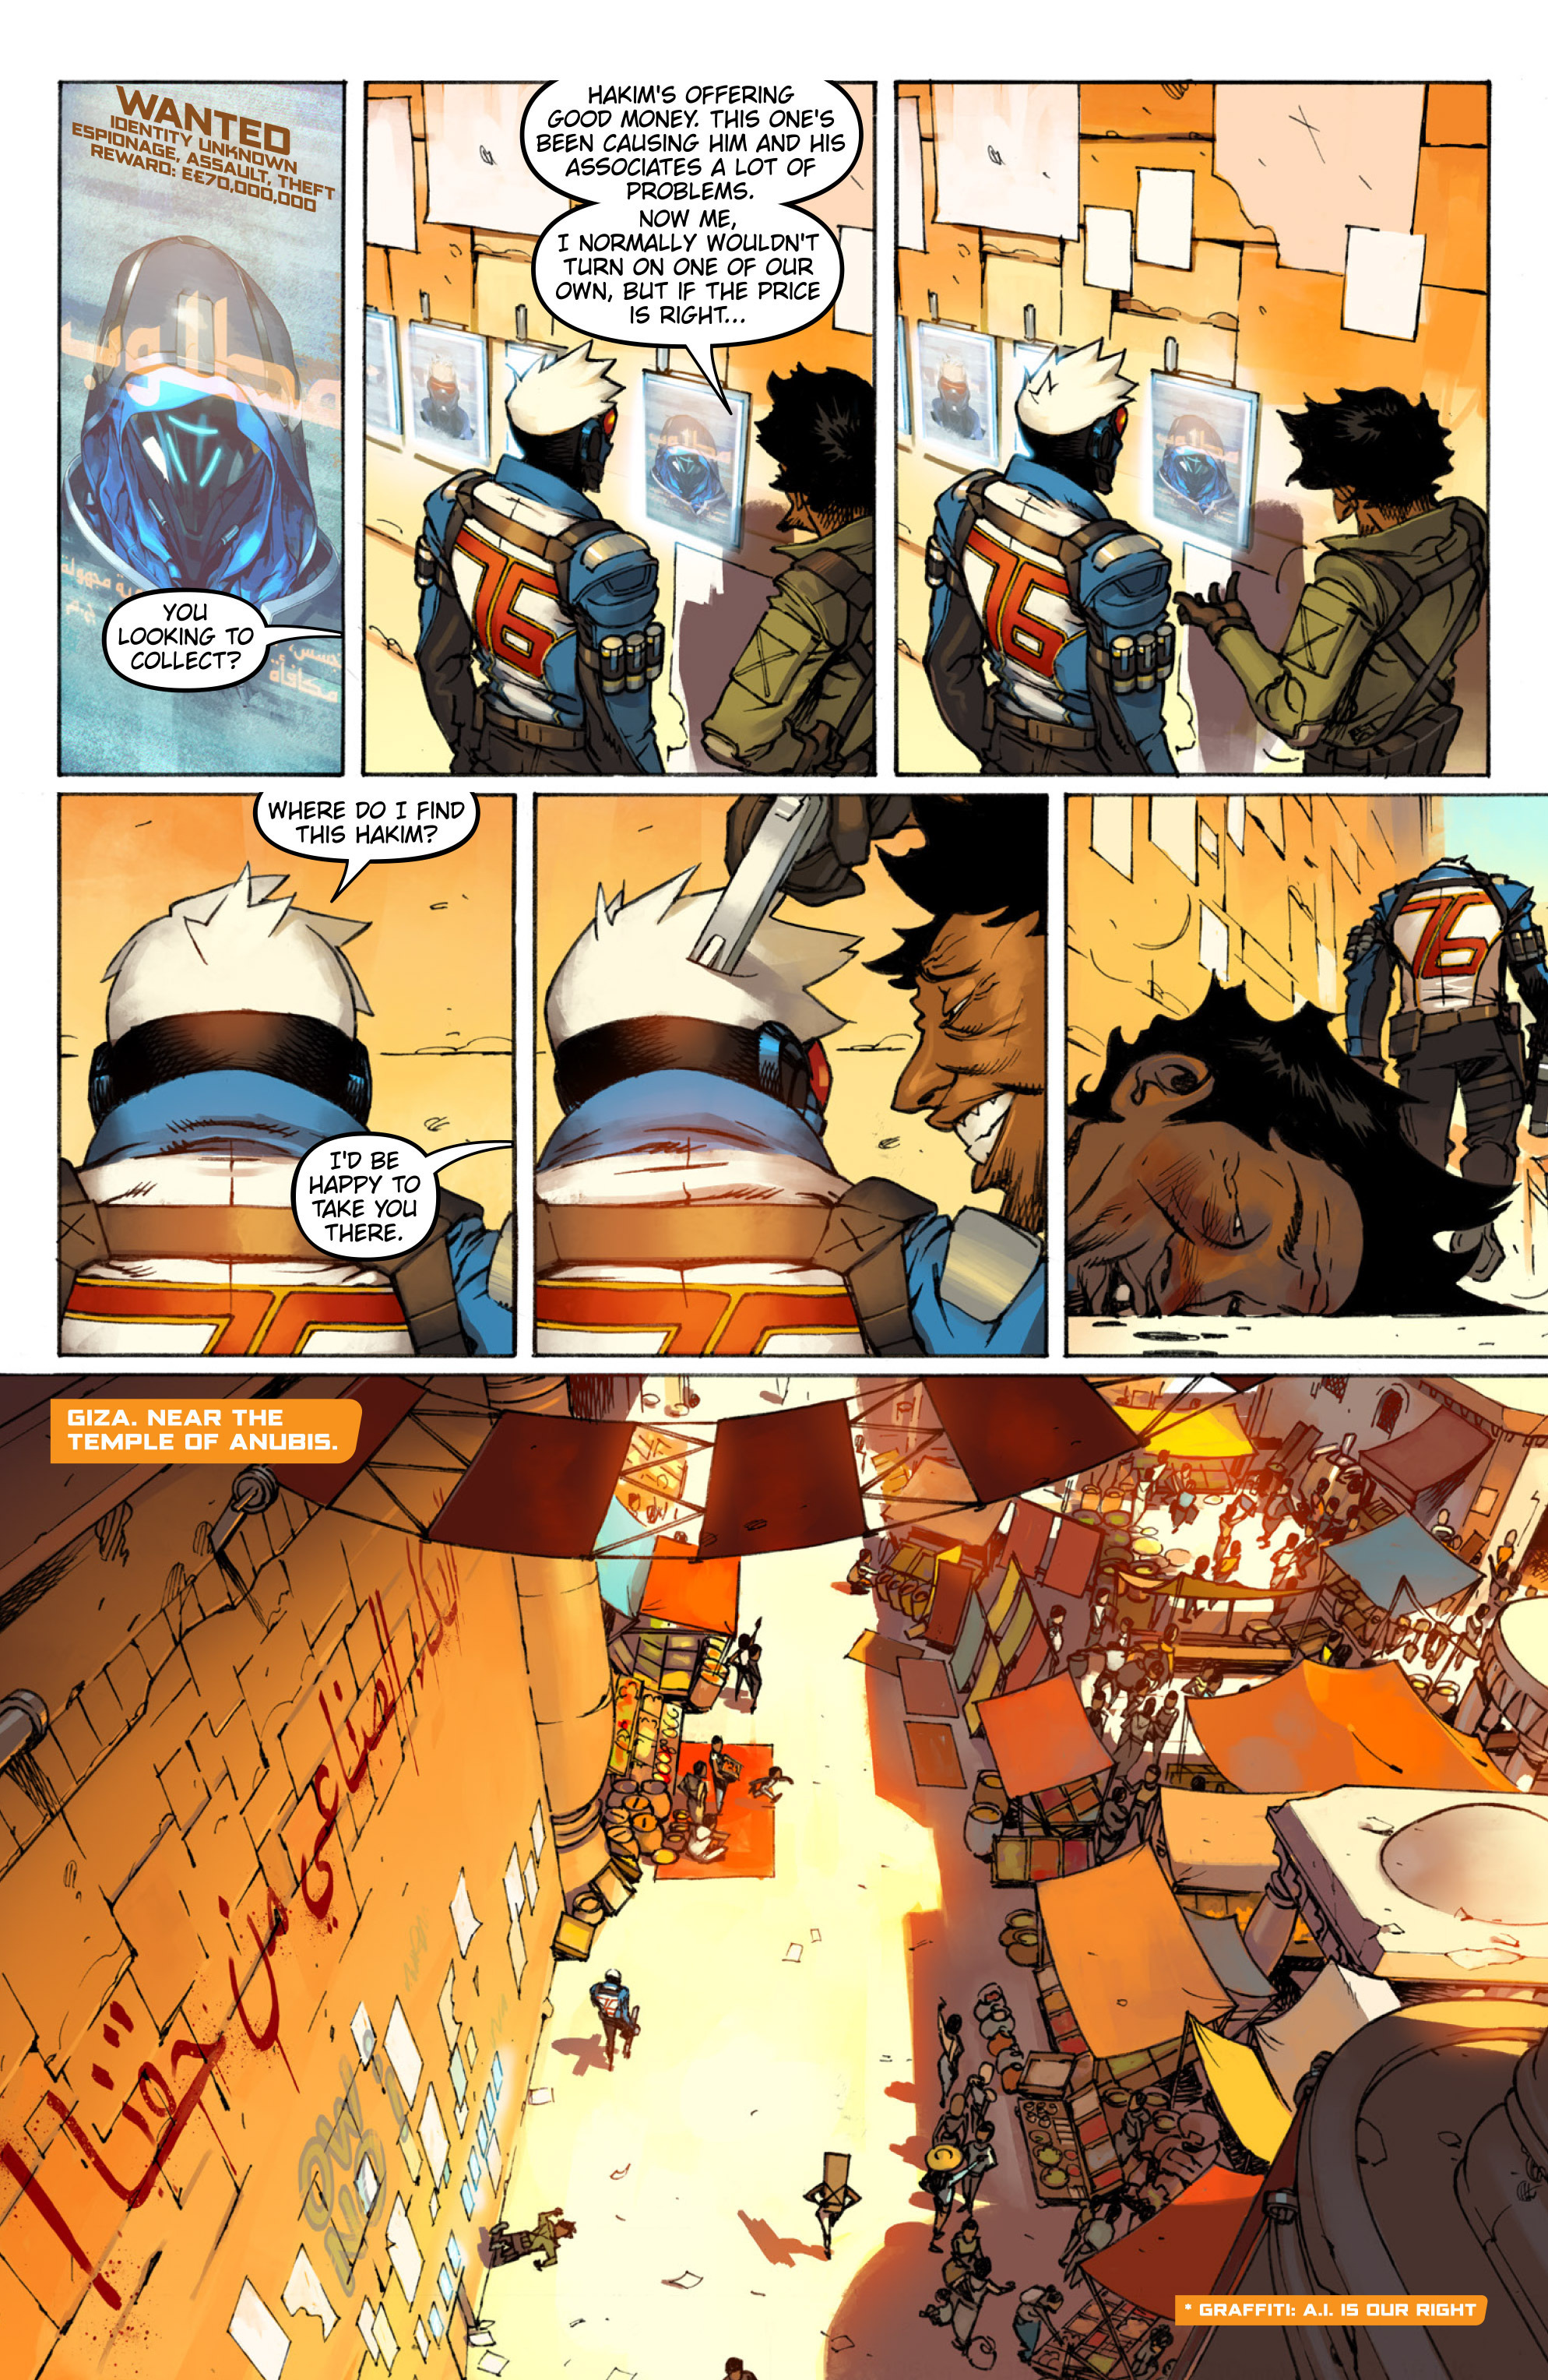 Overwatch (2016-): Chapter 8 - Page 3